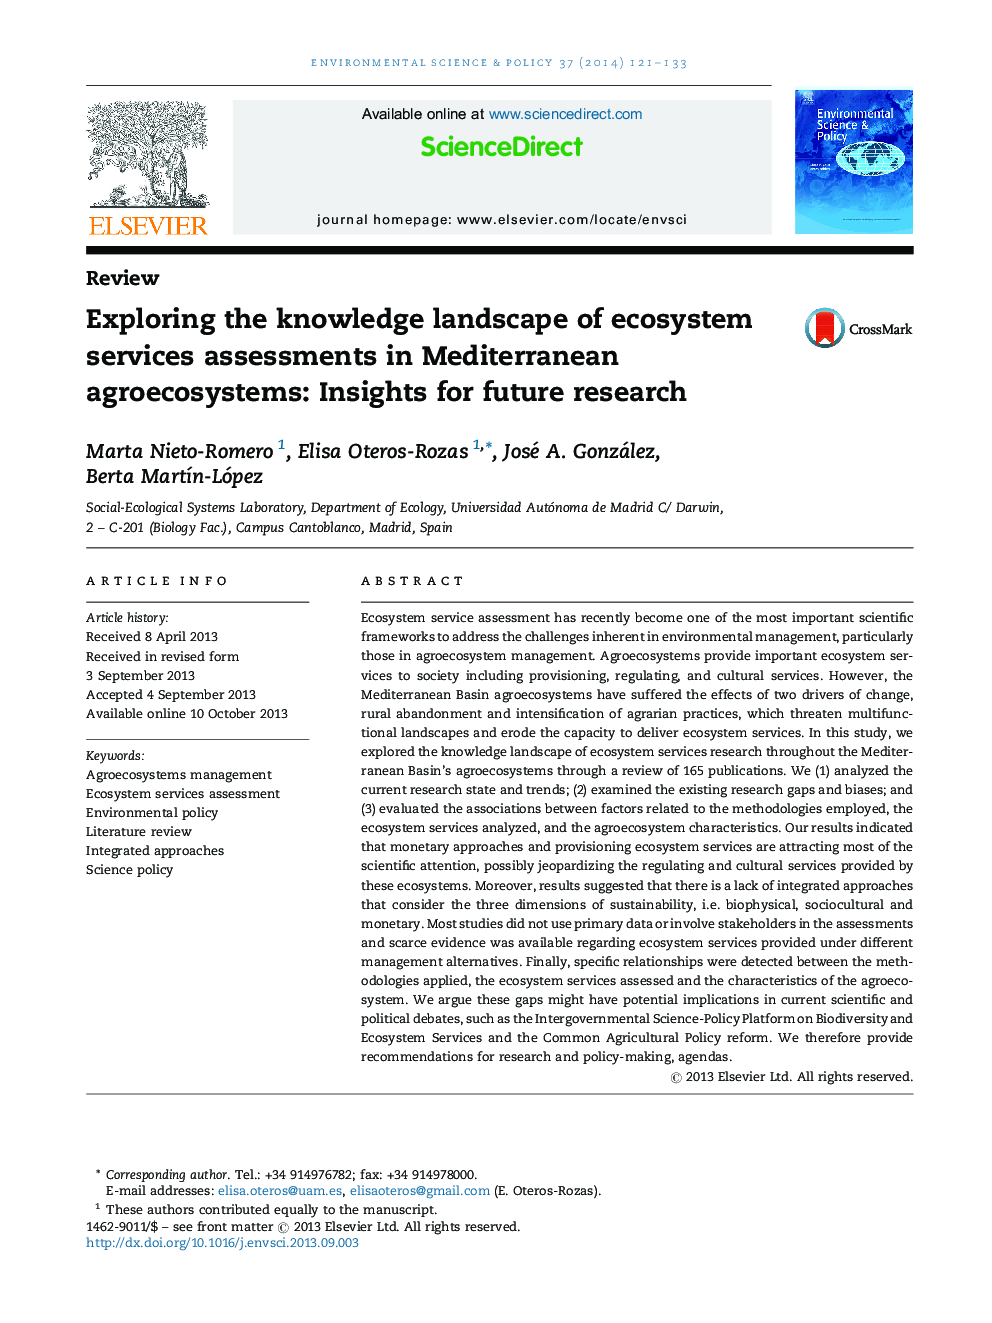 Exploring the knowledge landscape of ecosystem services assessments in Mediterranean agroecosystems: Insights for future research